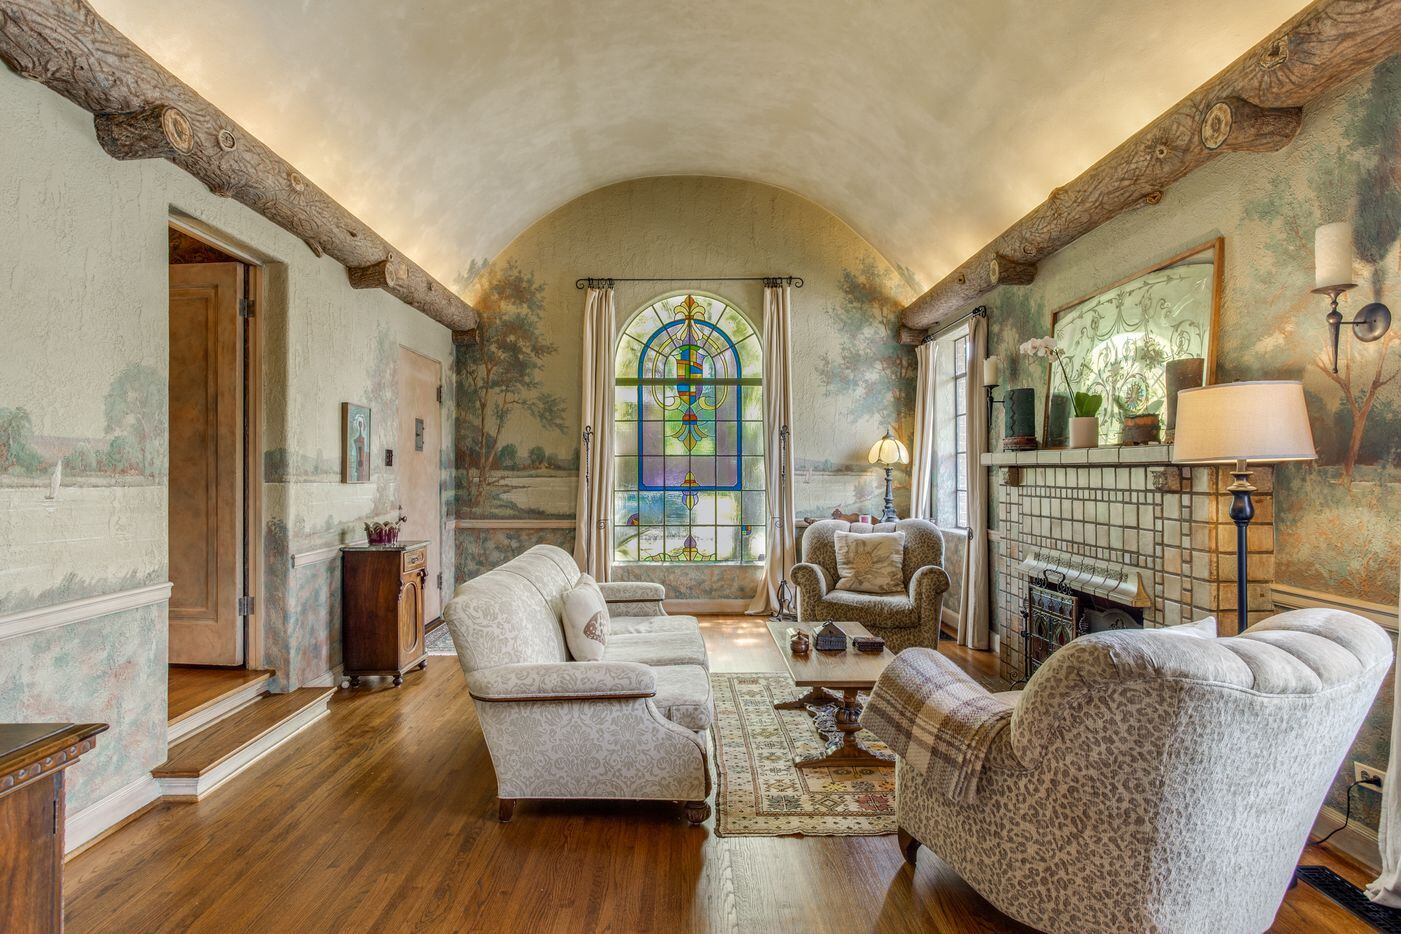 Take a look at this historic Hollywood Heights home at 802 Clermont Ave. in Dallas.